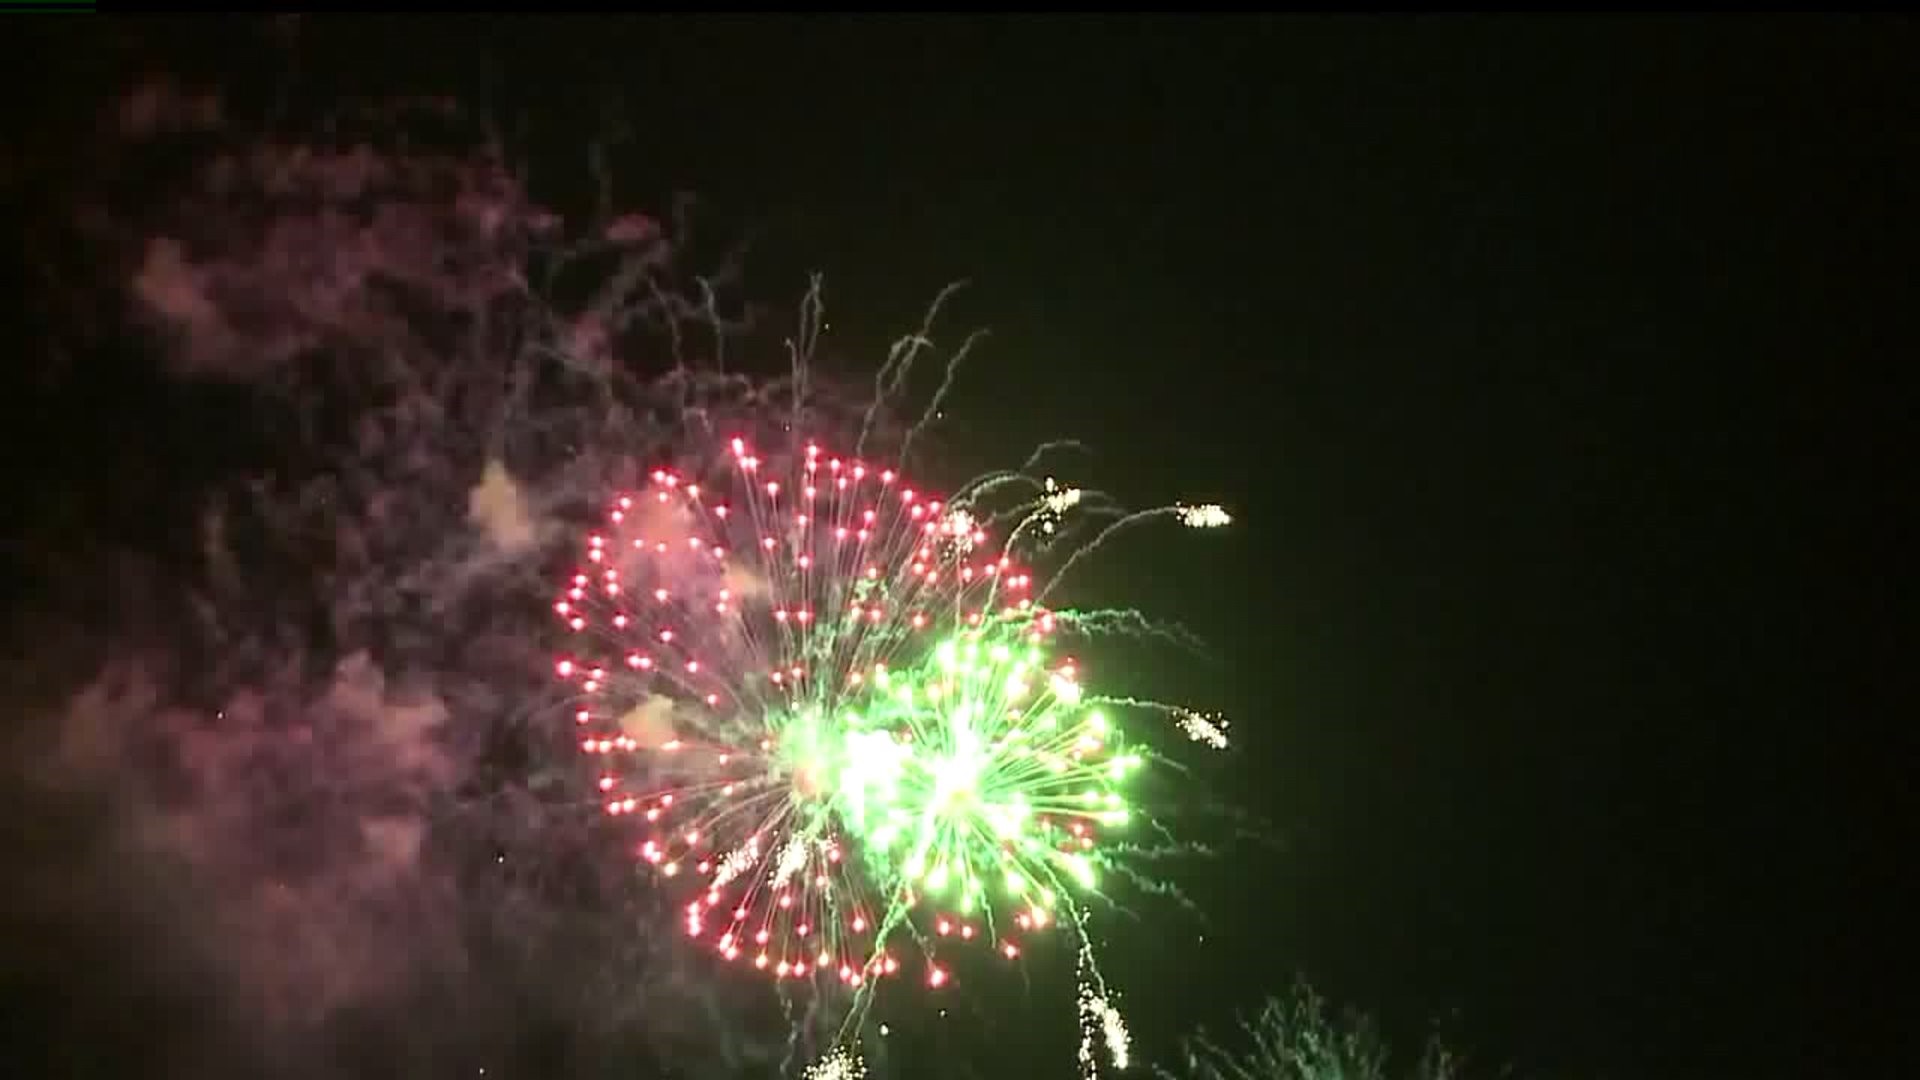 Higher volume of firework complaints in York this year